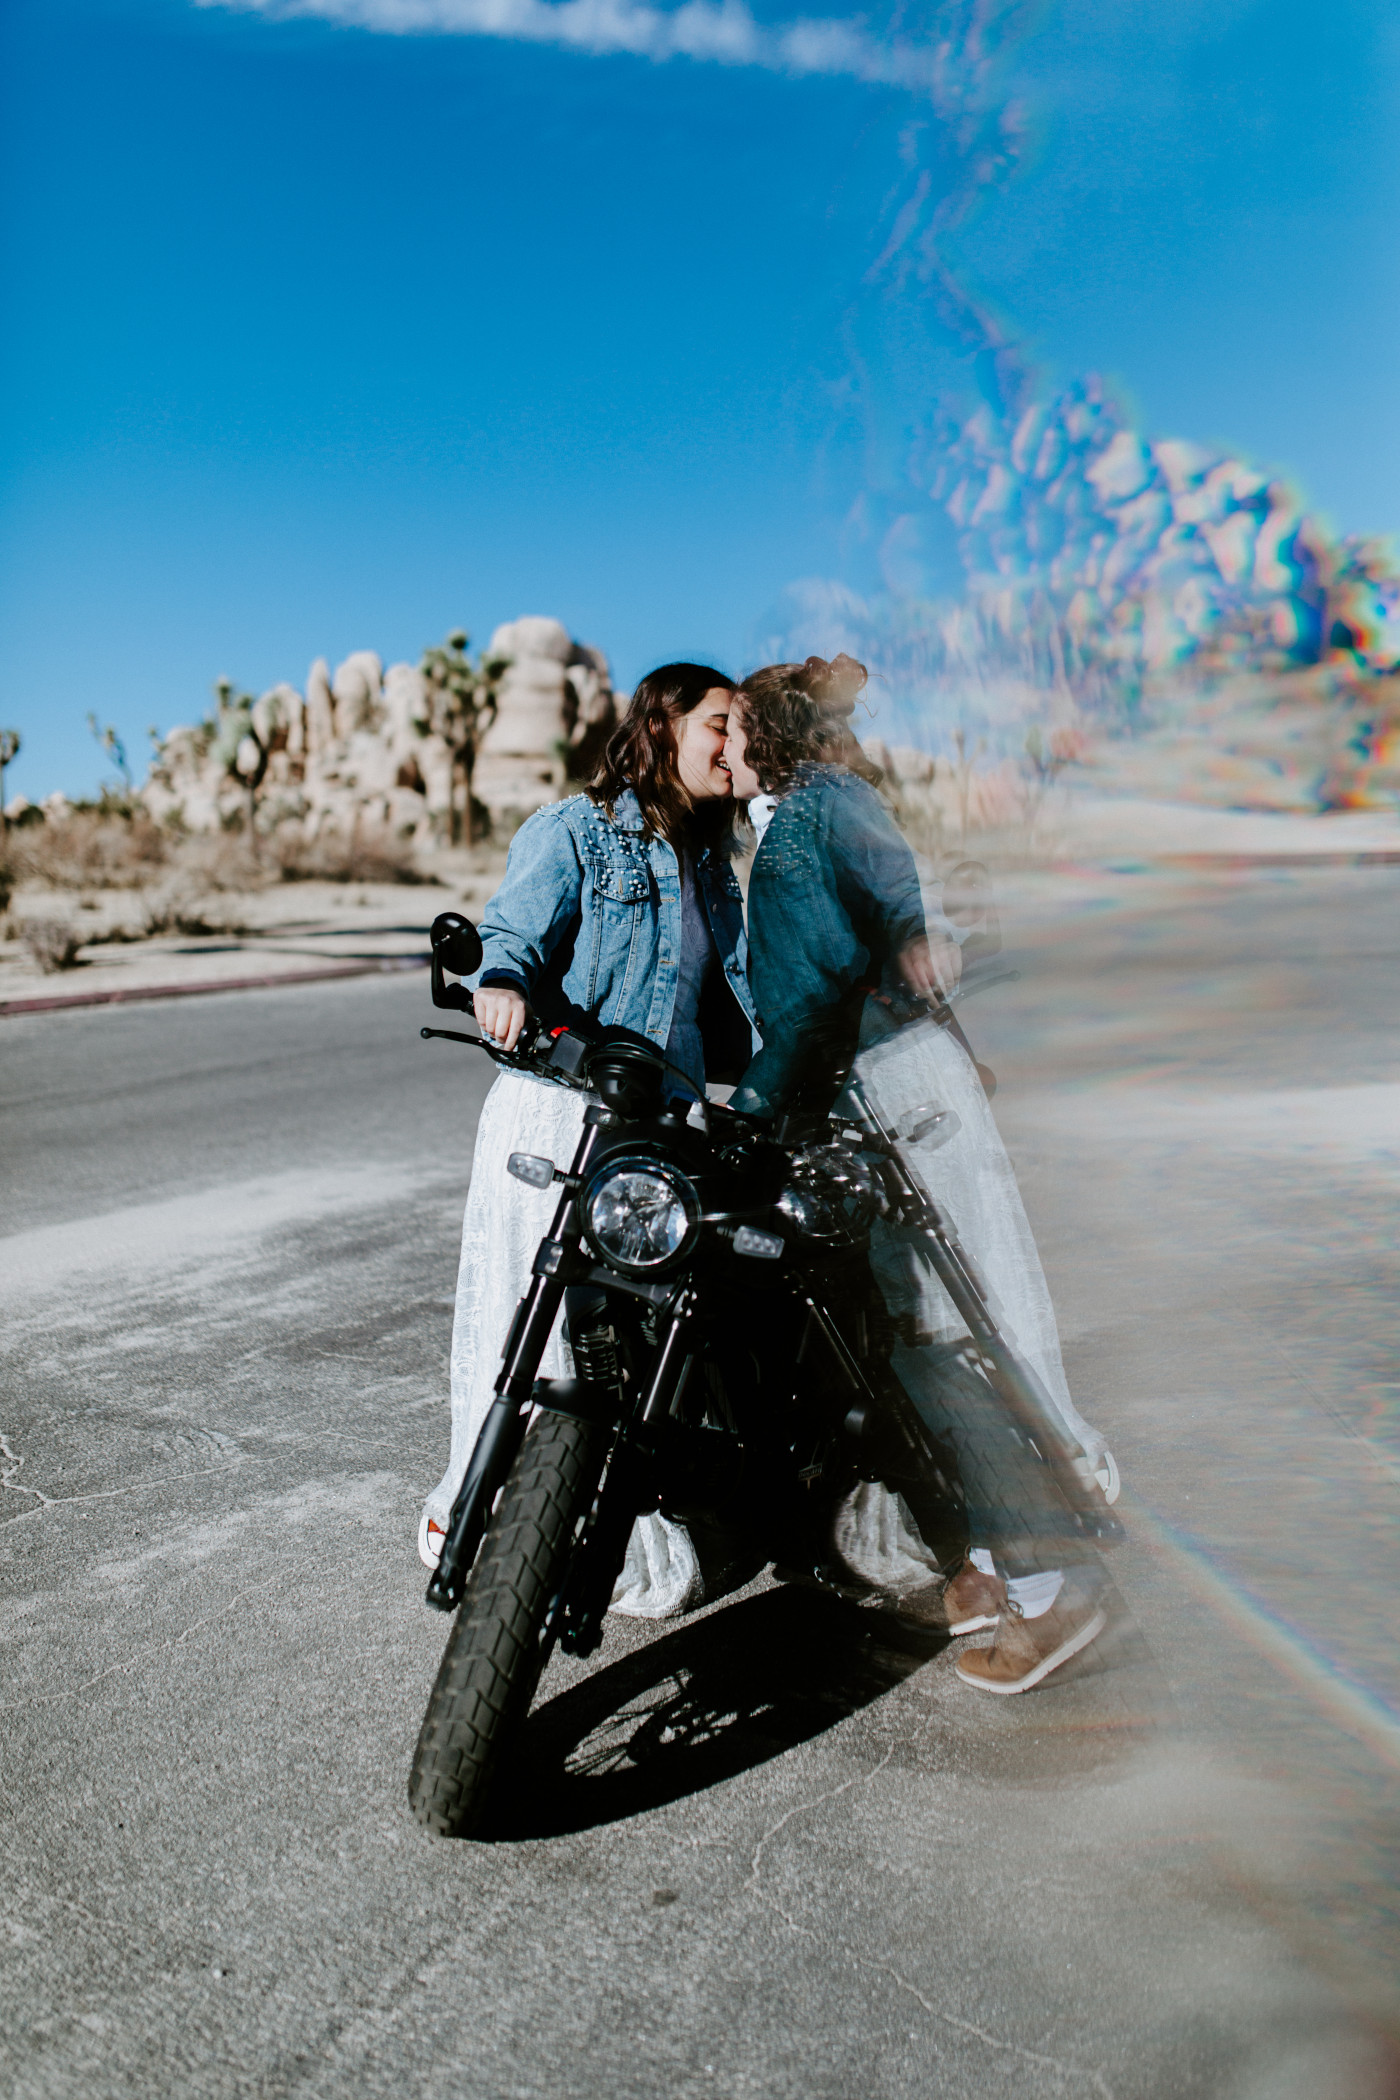 Madison and Becca stand kiss while standing near their motorcycle.